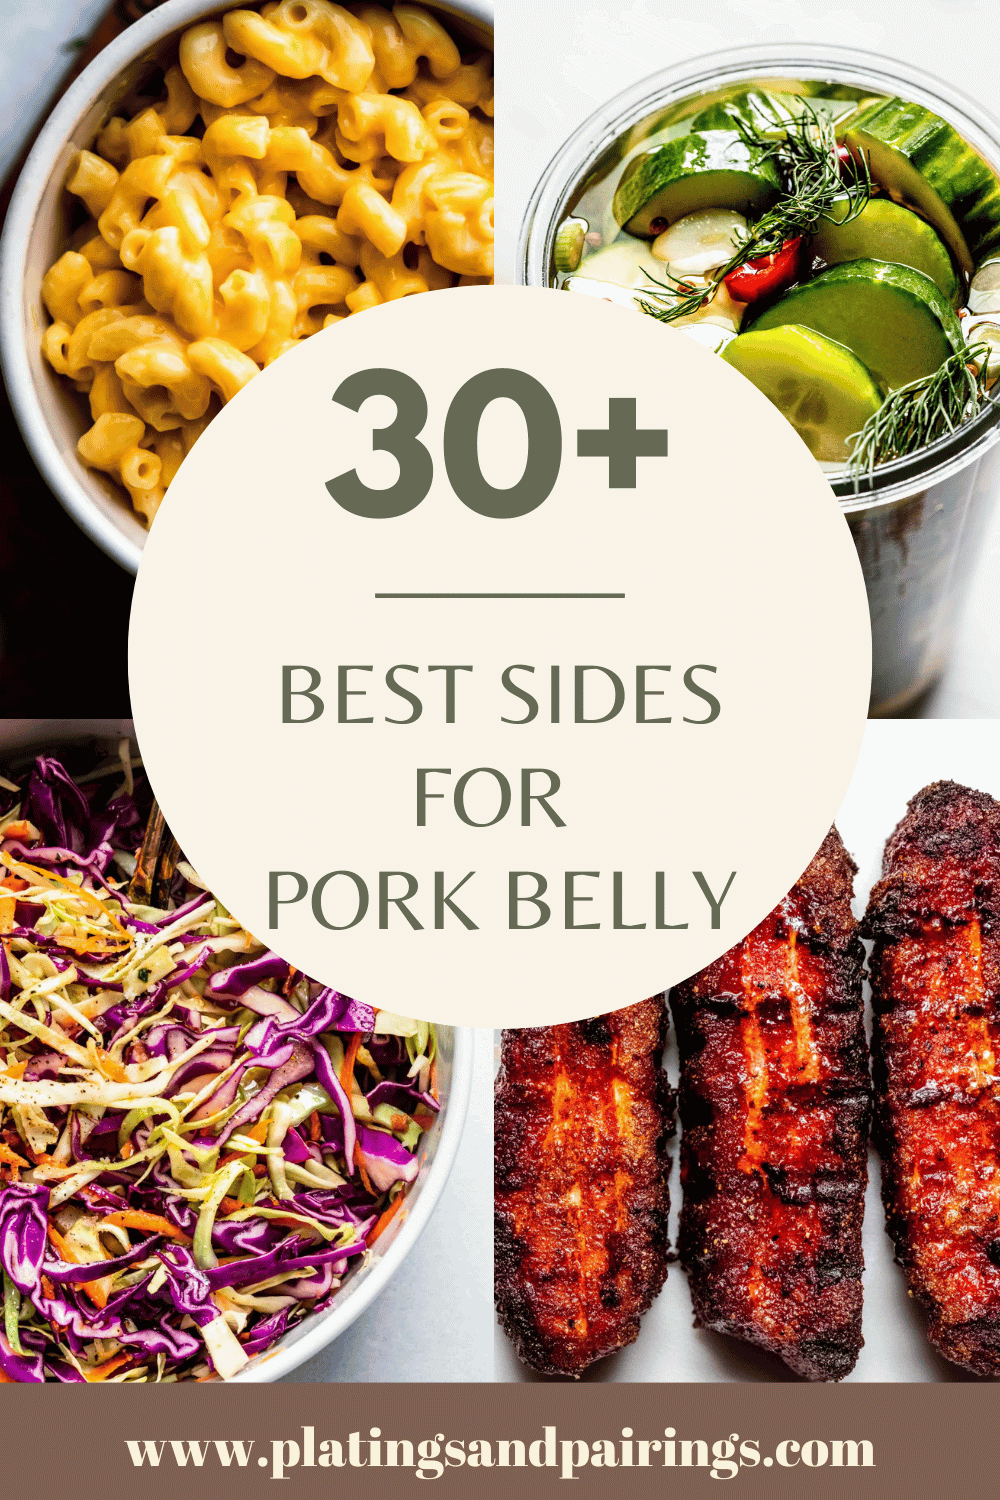 Collage of sides for pork belly with text overlay.